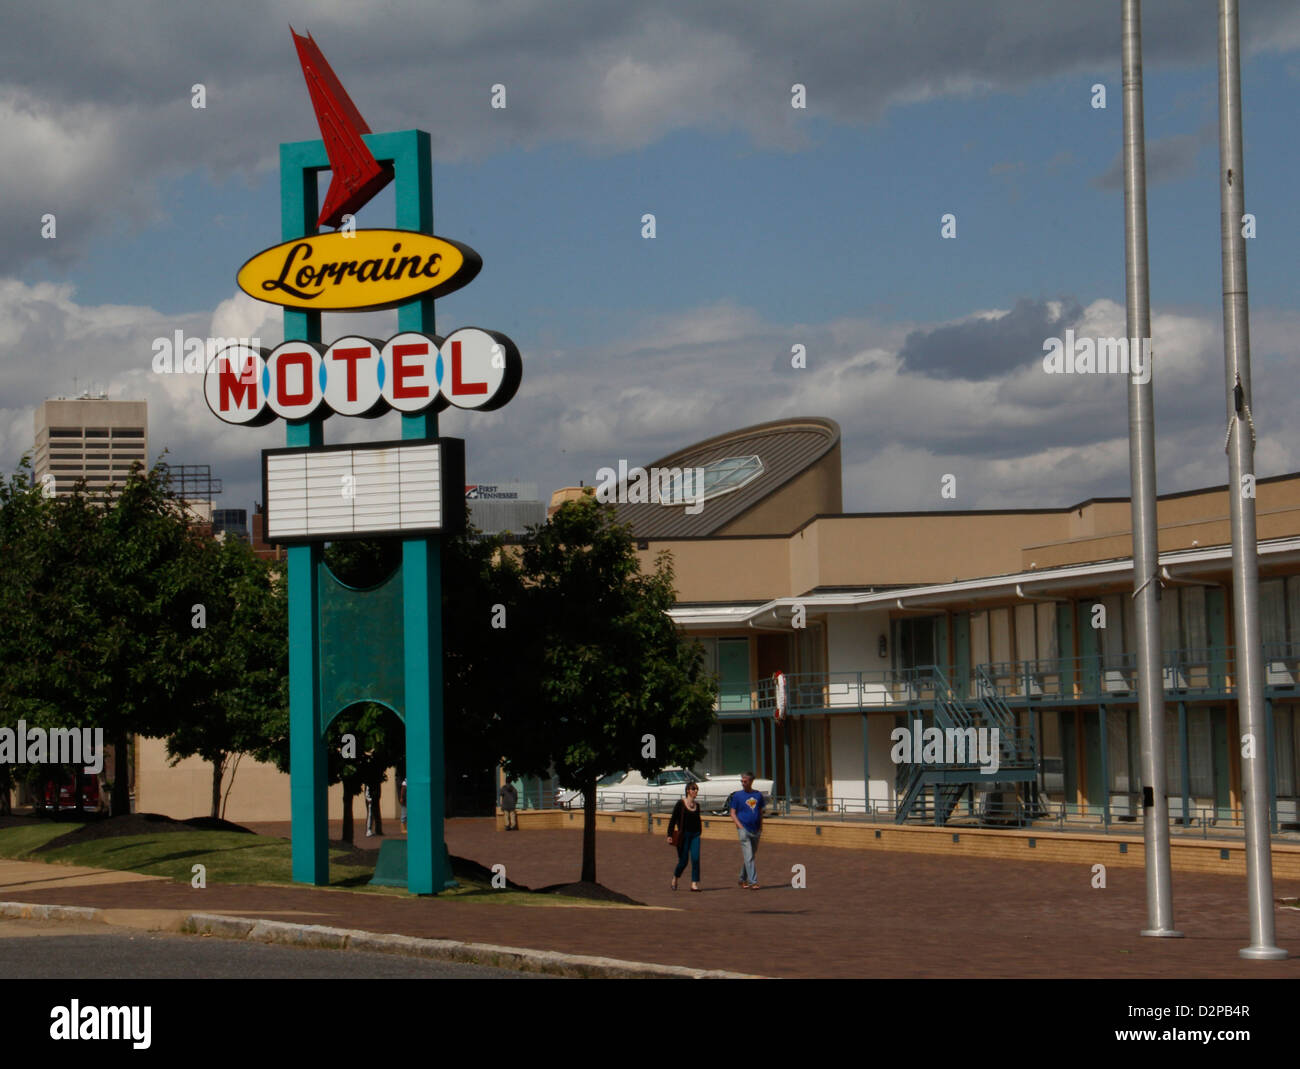 Lorraine Motel memorial National Civil Rights Museum Room 306 Martin Luther King Jr. was assassination site Memphis Tennessee Stock Photo